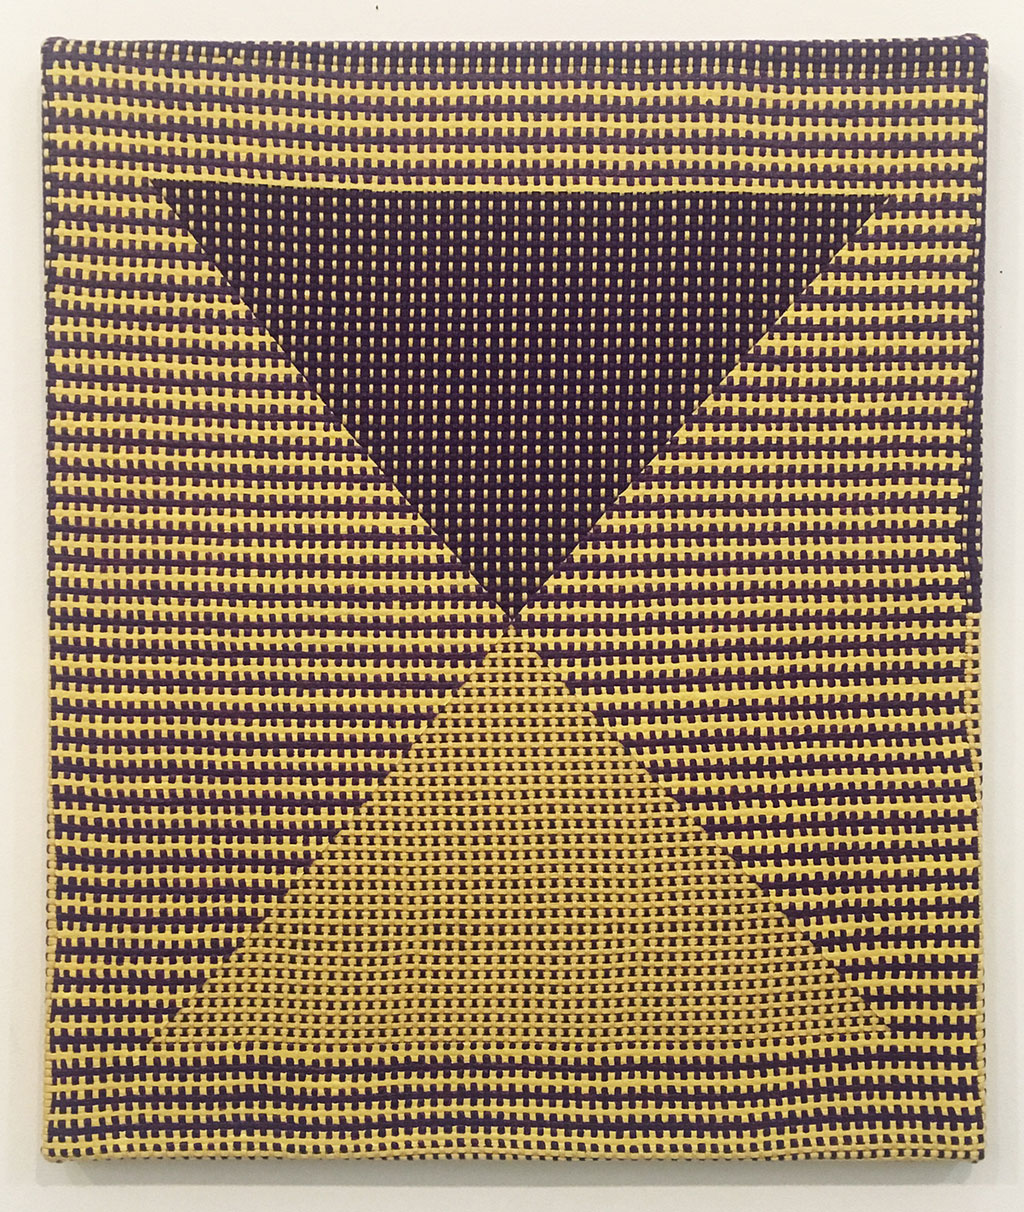 Samantha Bittman, Untitled, 2018. Material Meaning: A Living Legacy of Anni Albers, Craft in America